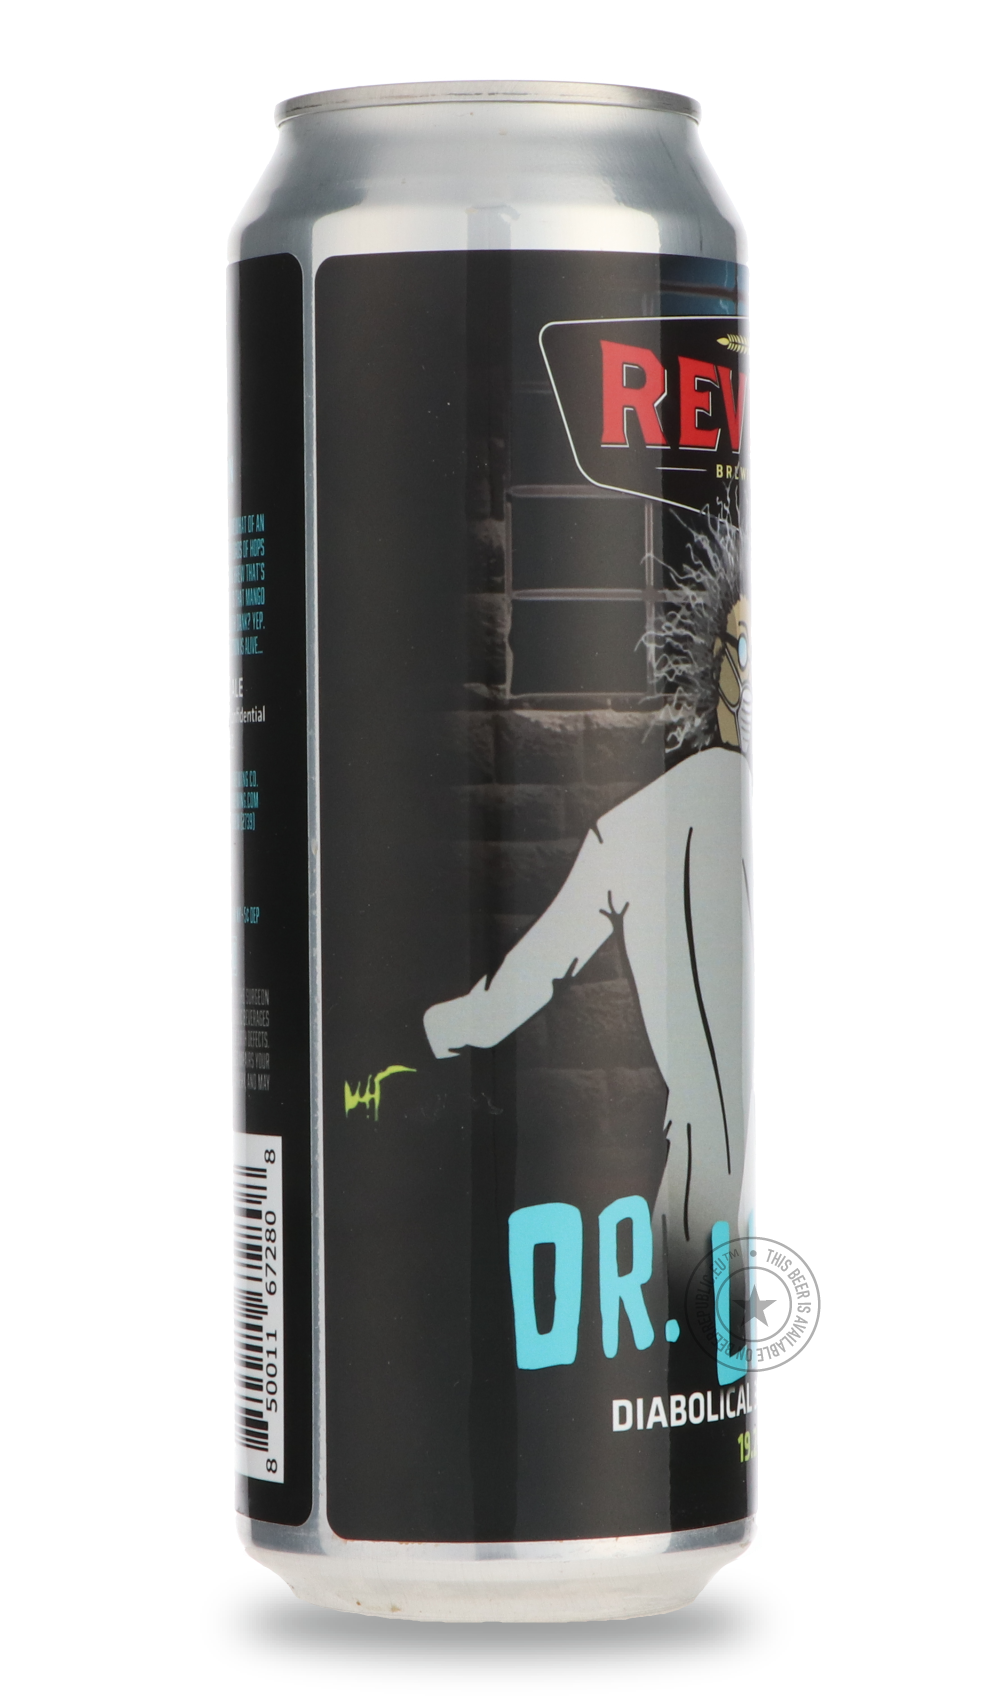 -Revision- Dr. Lupulin 3x-IPA- Only @ Beer Republic - The best online beer store for American & Canadian craft beer - Buy beer online from the USA and Canada - Bier online kopen - Amerikaans bier kopen - Craft beer store - Craft beer kopen - Amerikanisch bier kaufen - Bier online kaufen - Acheter biere online - IPA - Stout - Porter - New England IPA - Hazy IPA - Imperial Stout - Barrel Aged - Barrel Aged Imperial Stout - Brown - Dark beer - Blond - Blonde - Pilsner - Lager - Wheat - Weizen - Amber - Barley 